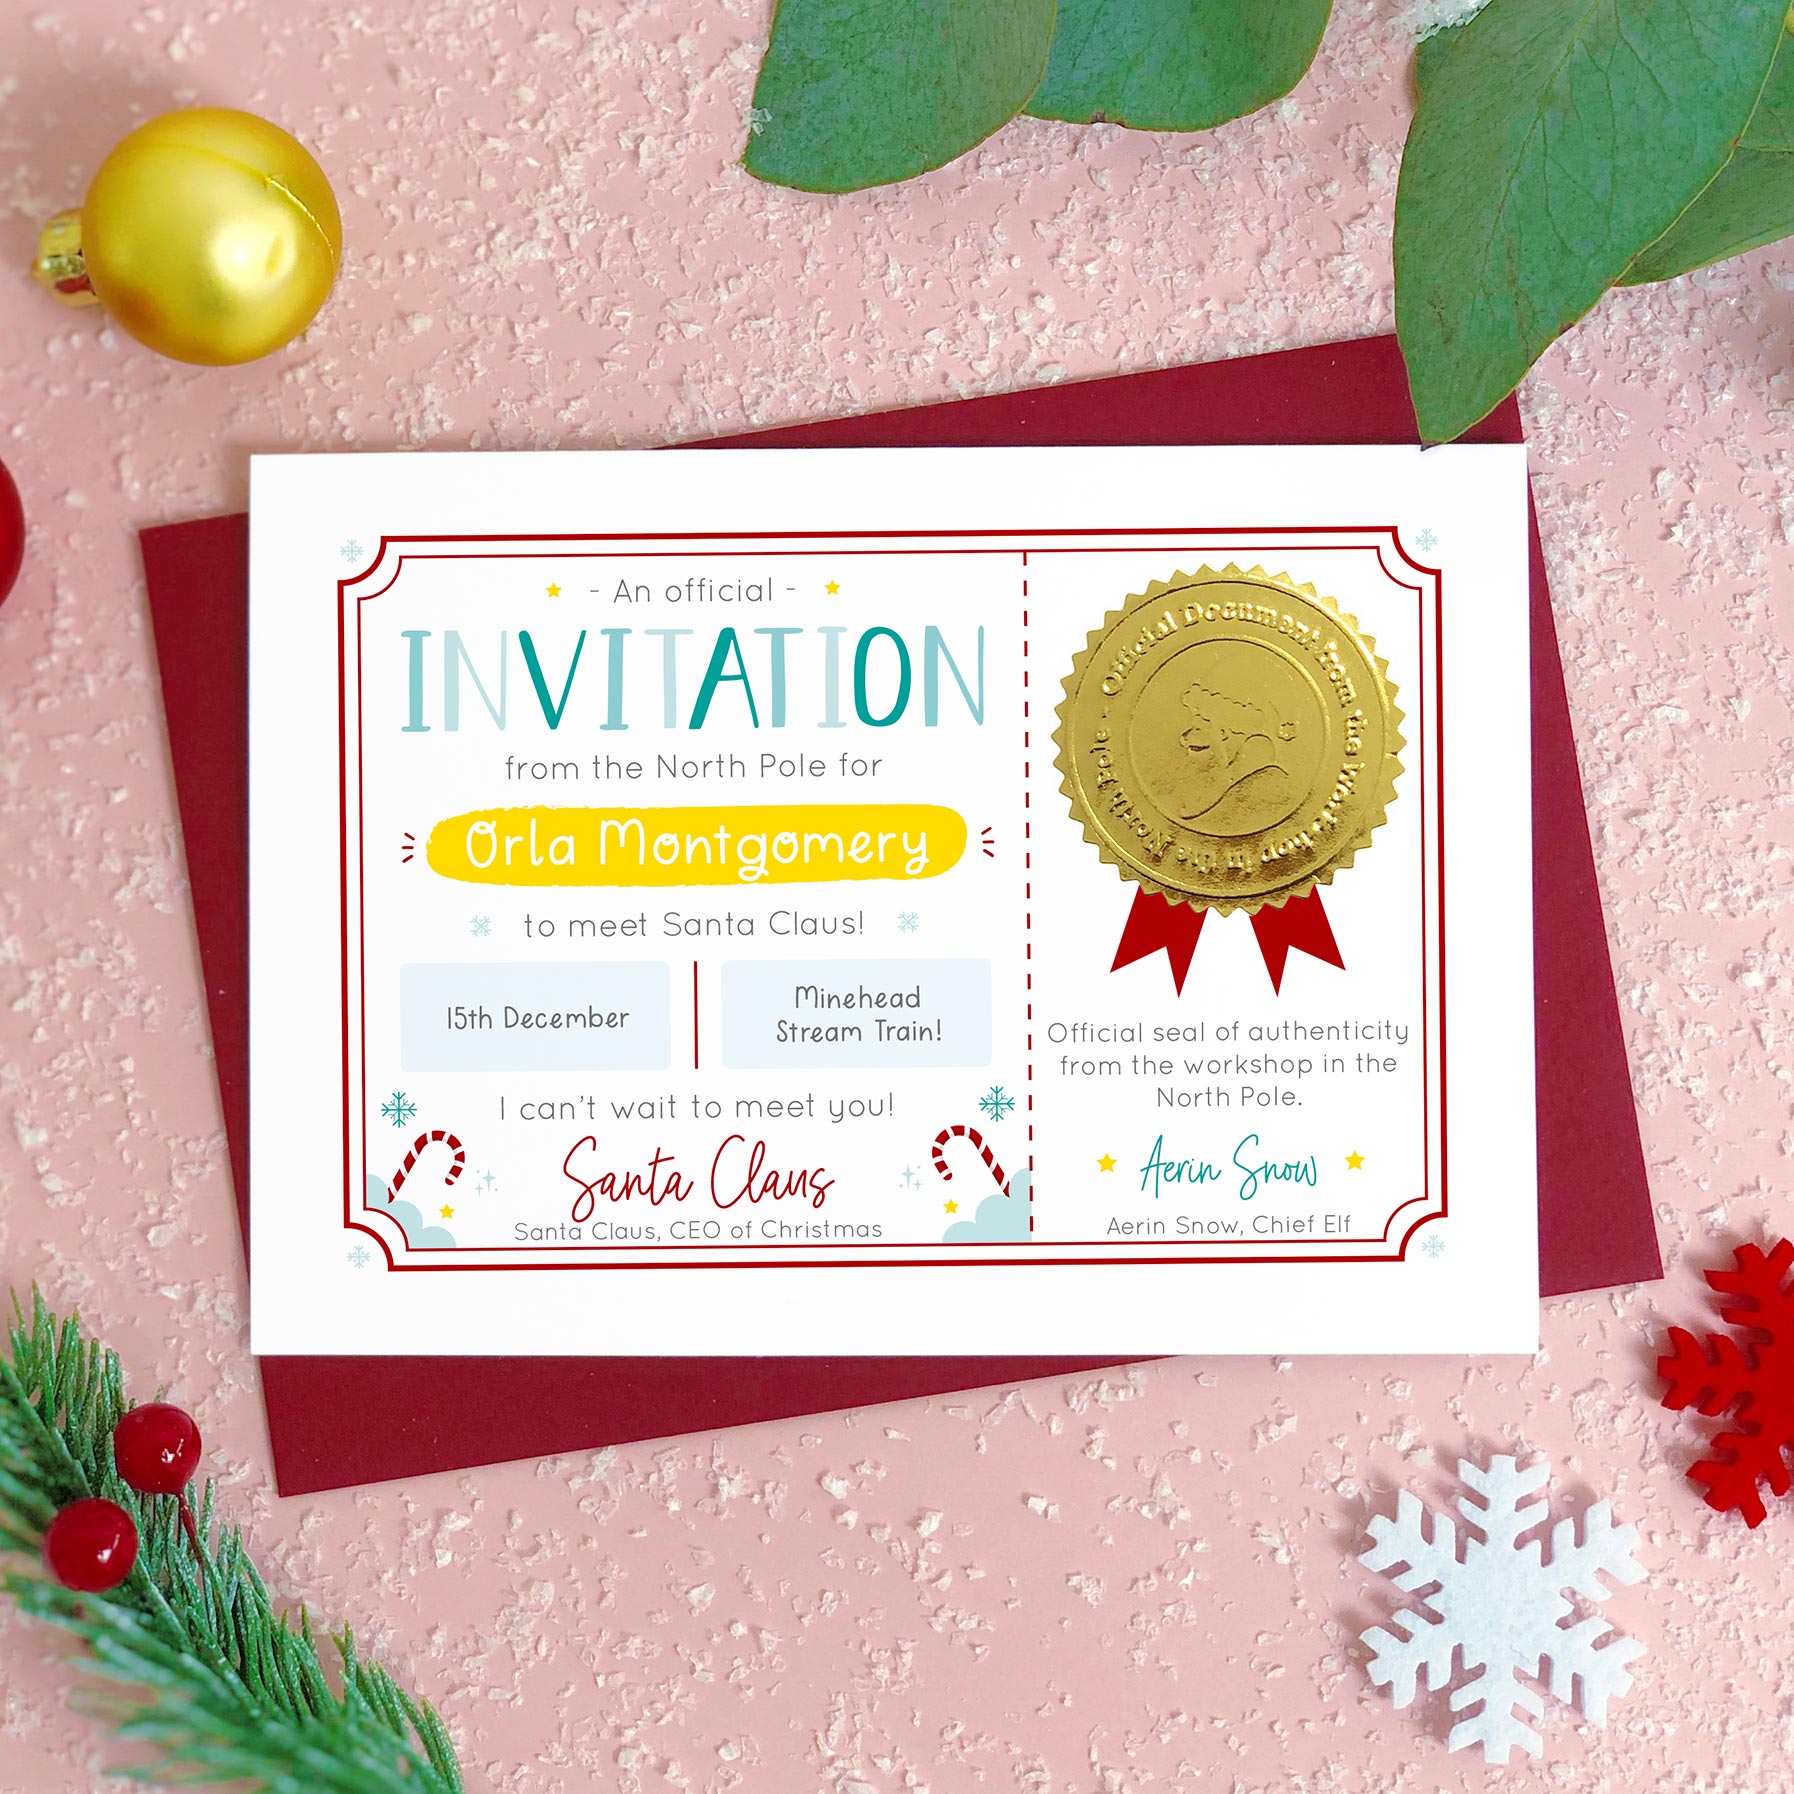 A personalised invitation certificate to visit Santa (or Father Christmas) photographed flat lay style on top of a pink background covered in ‘snow’, pieces of foliage, snowflakes and a bauble. The card is personalised with a childs name, date of the visit to meet Father Christmas and the location. It also features a shiny gold seal with the face of a santa character.